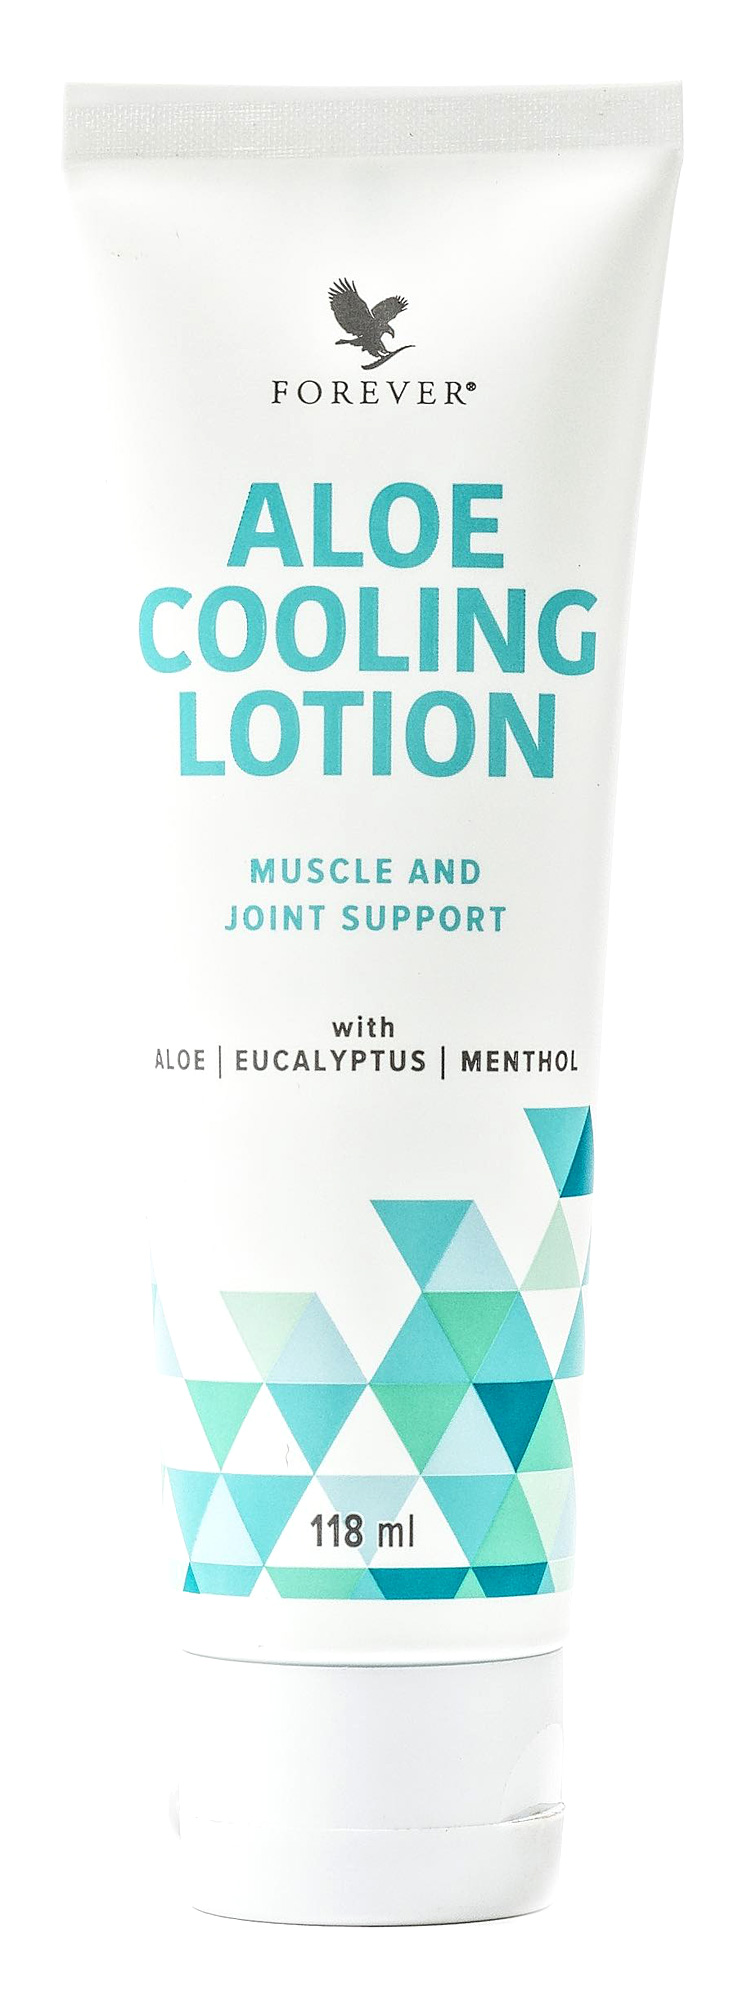 FOREVER Aloe Cooling Lotion